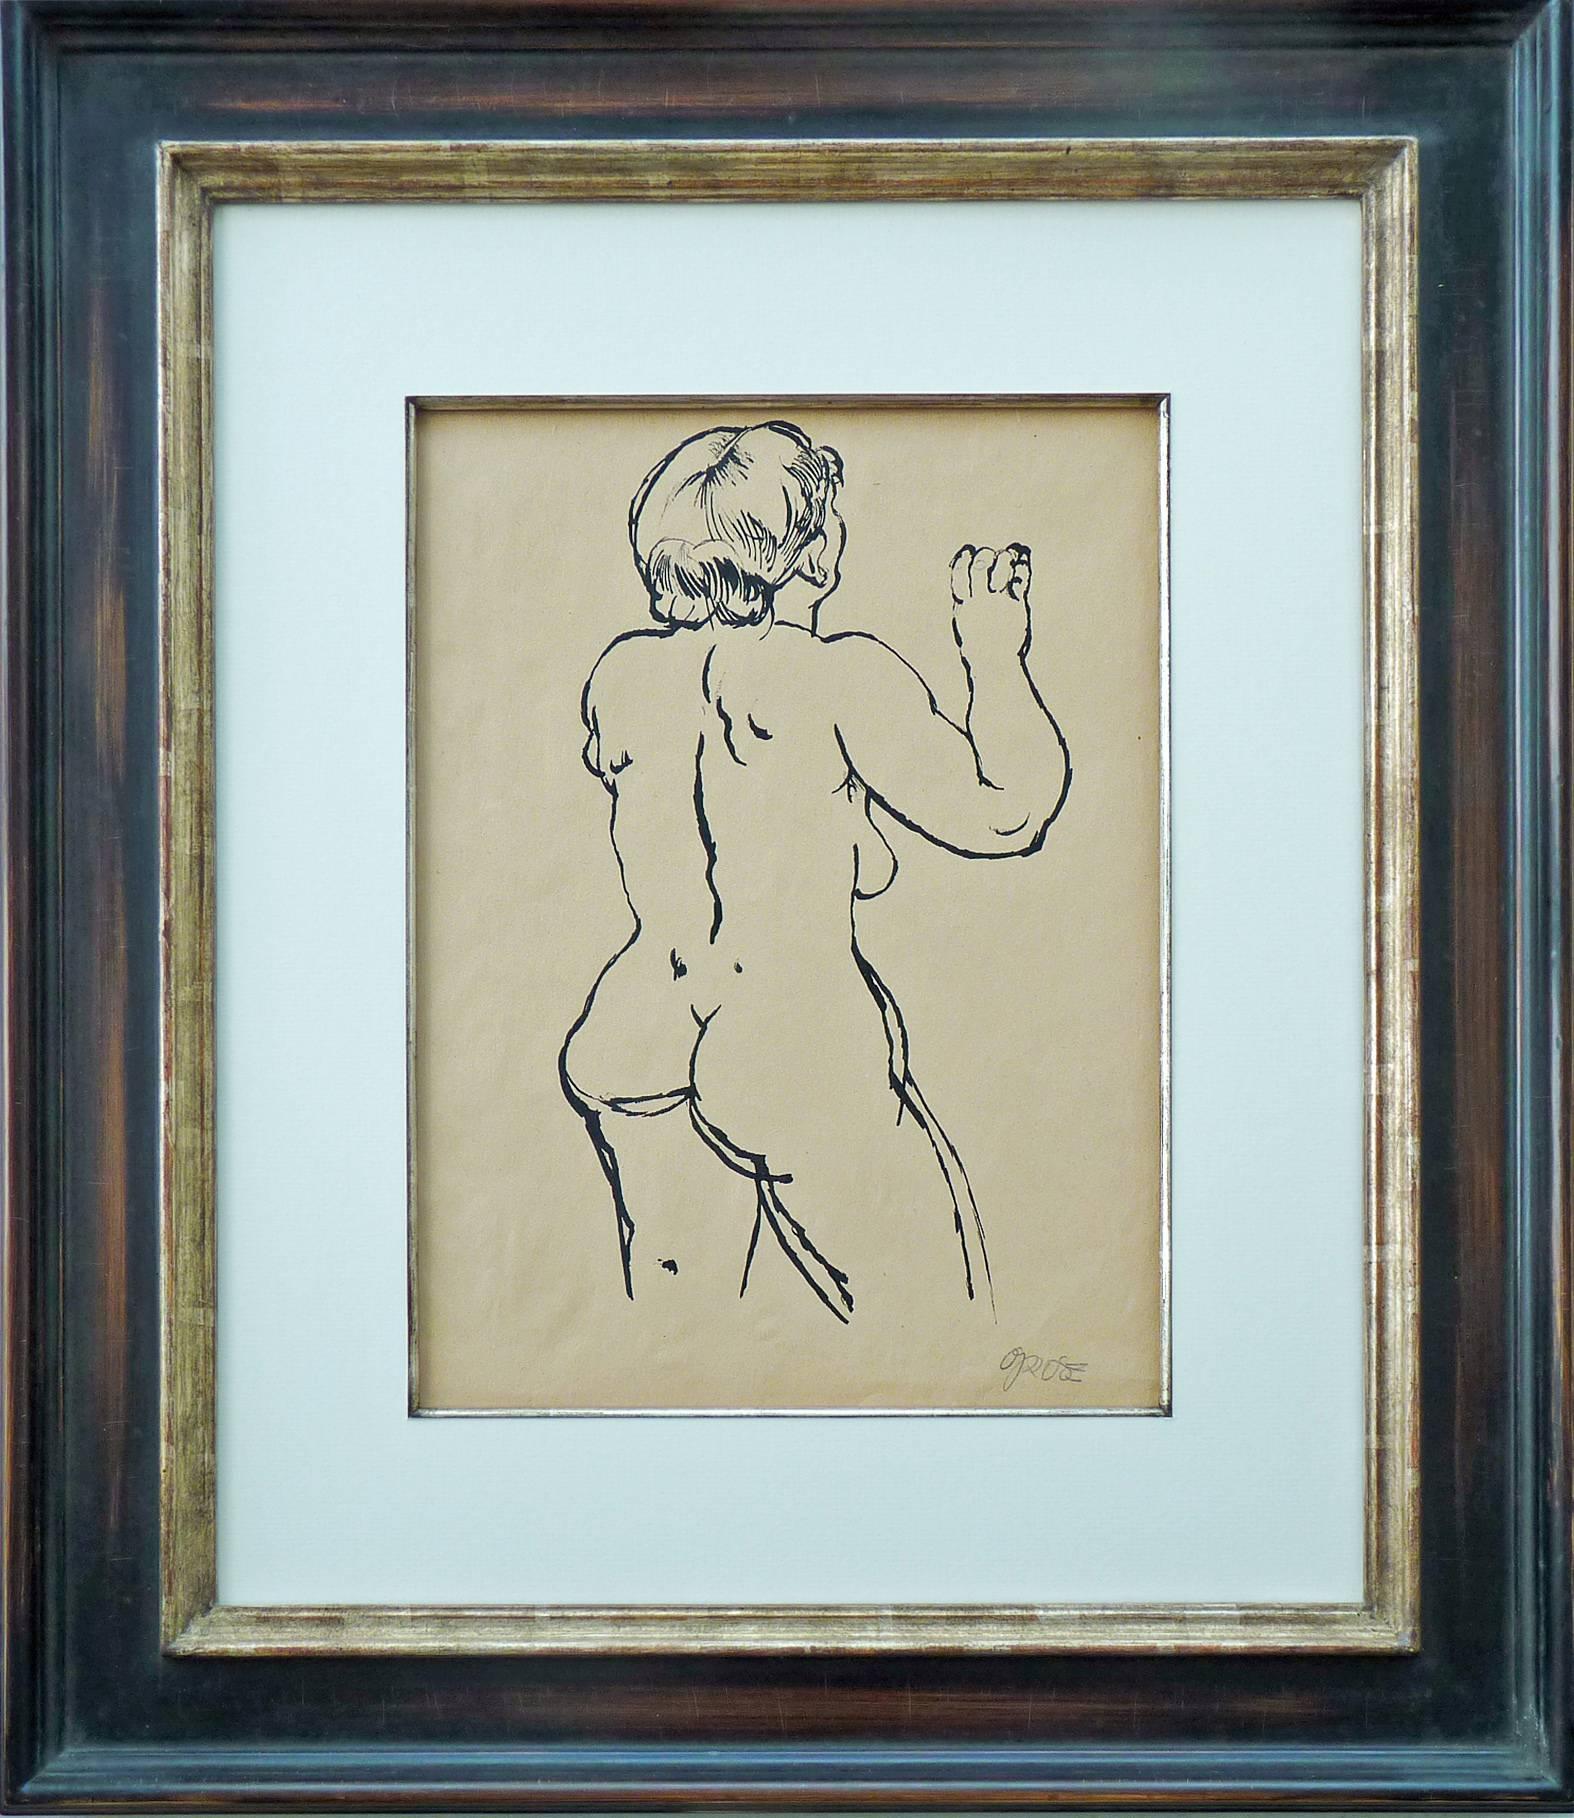 Standing Female Nude dating 1915 by George Grosz, German Expressionist Painter For Sale 1